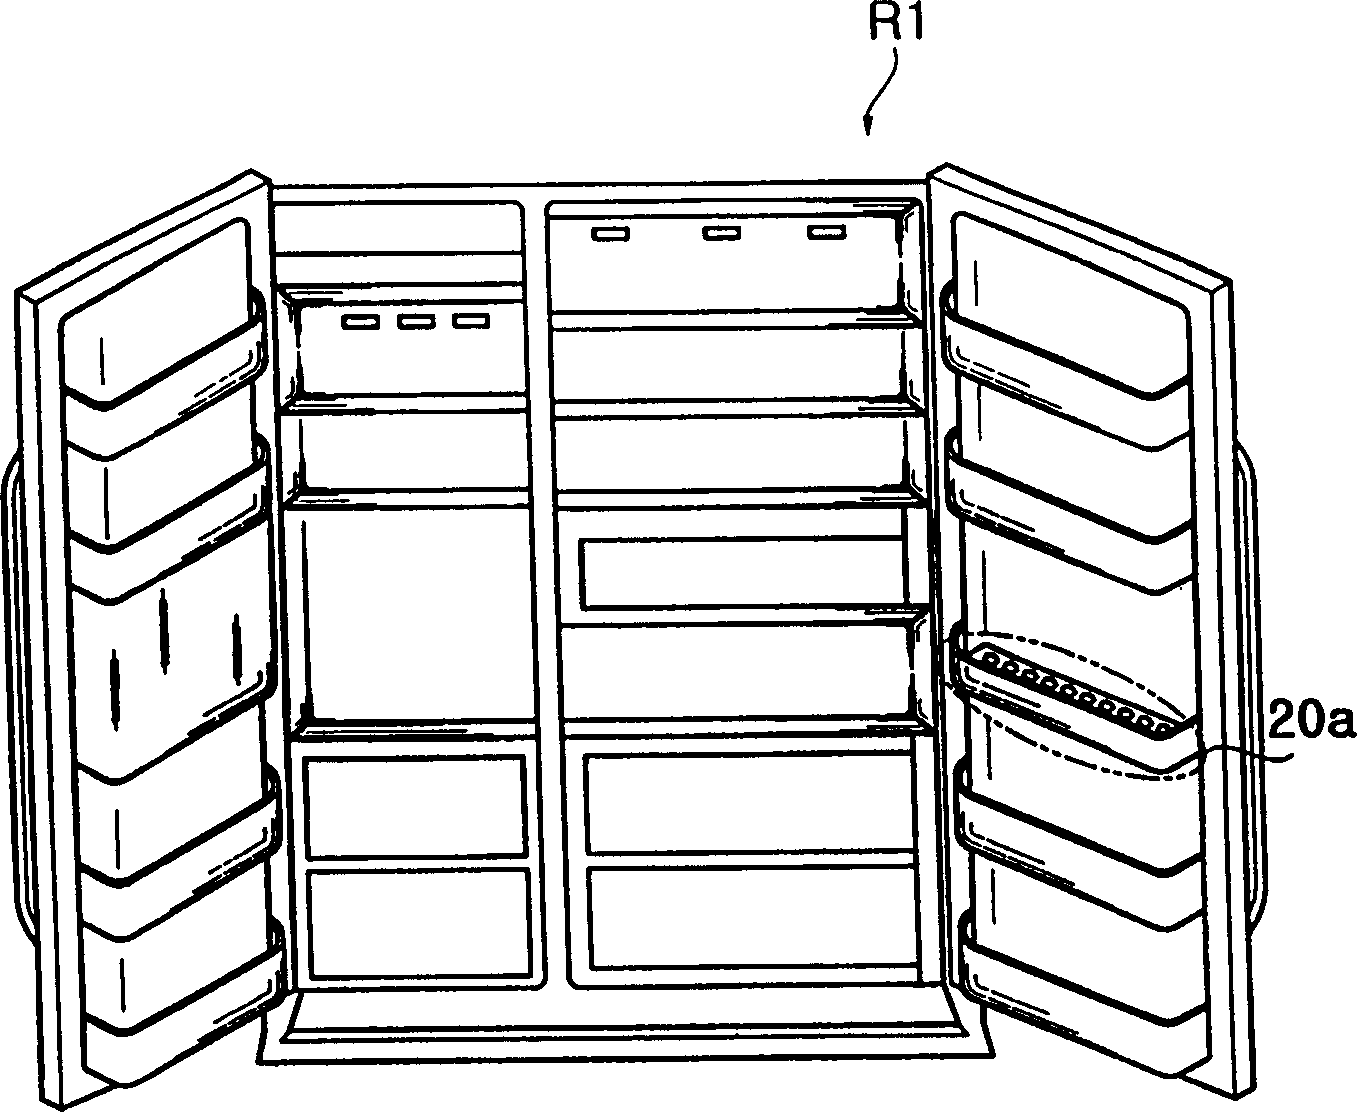 Automatic ordering foods type refrigerator and its operating method